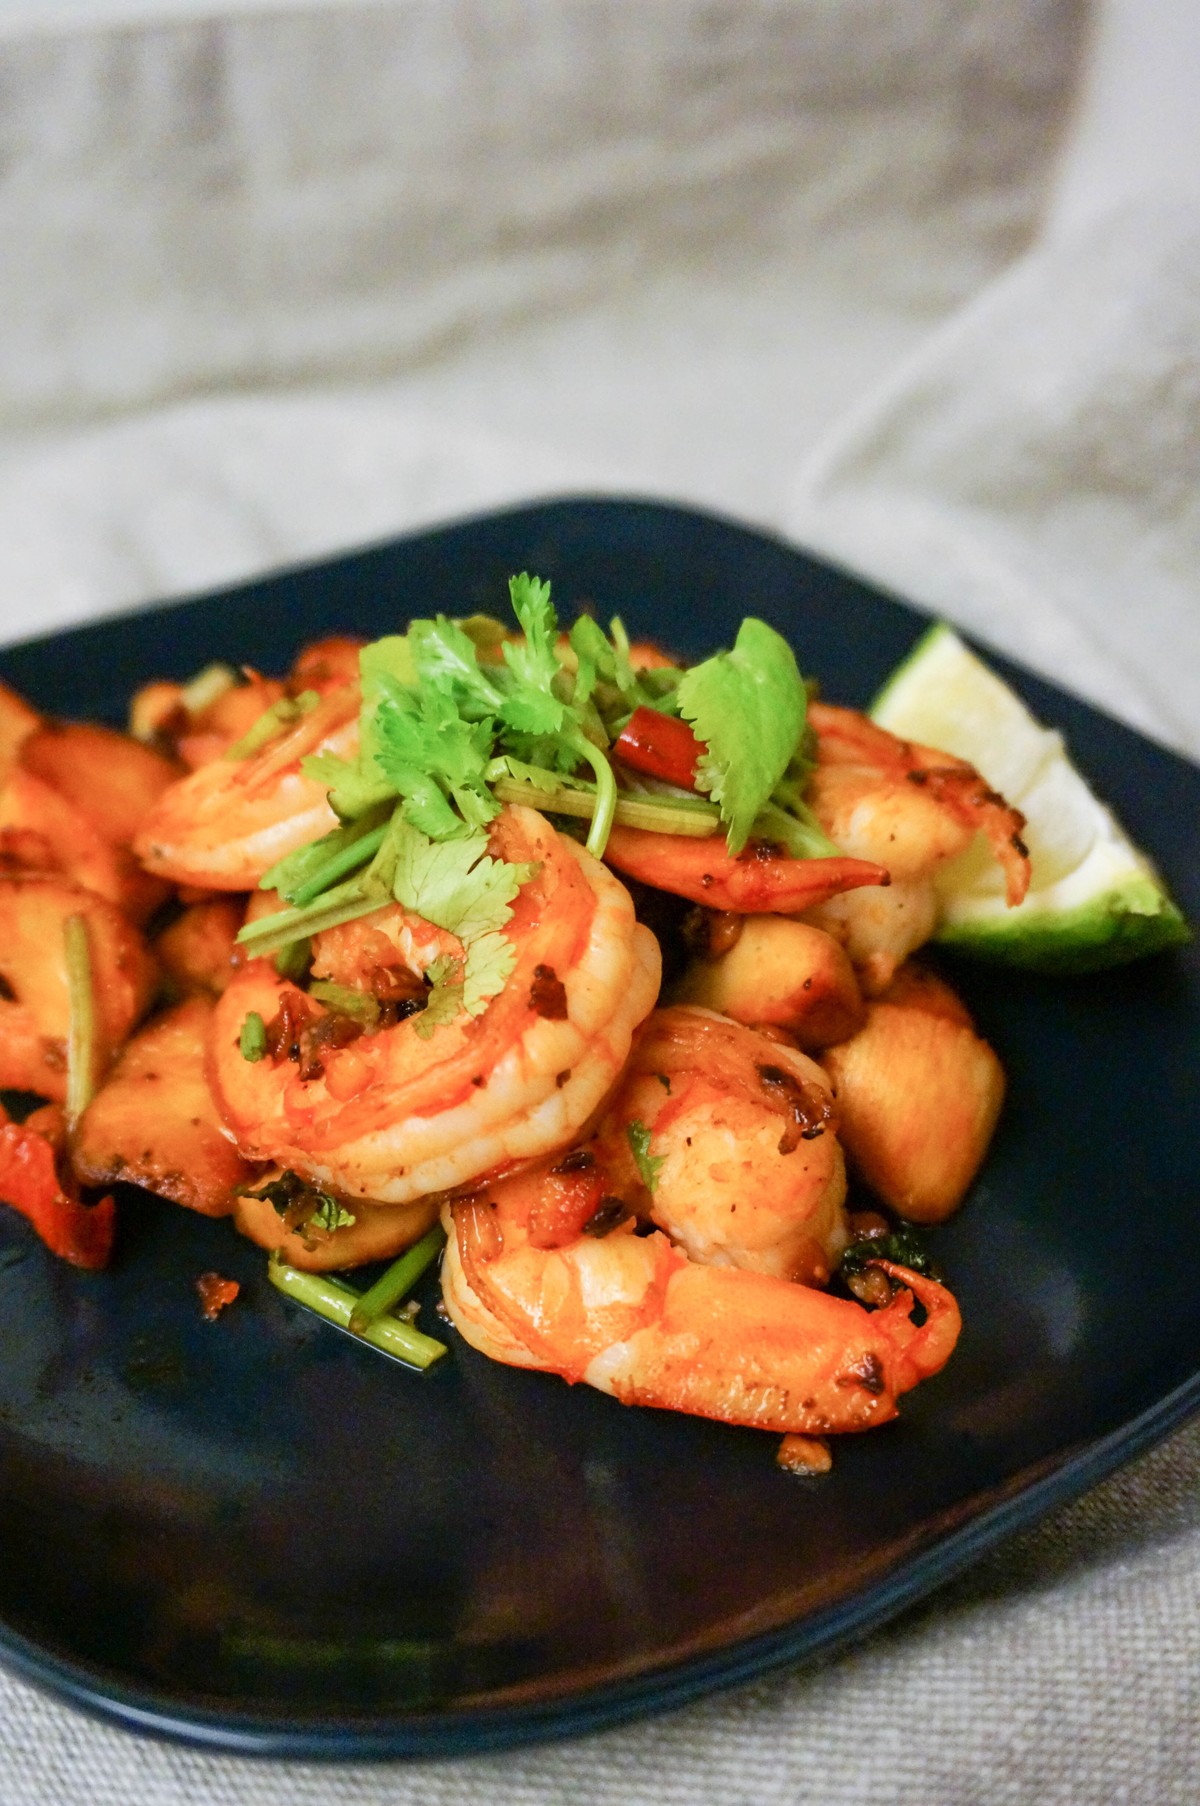 Shrimp is low in calories, vitamins and antioxidants, but has a high potential for allergies;  understand